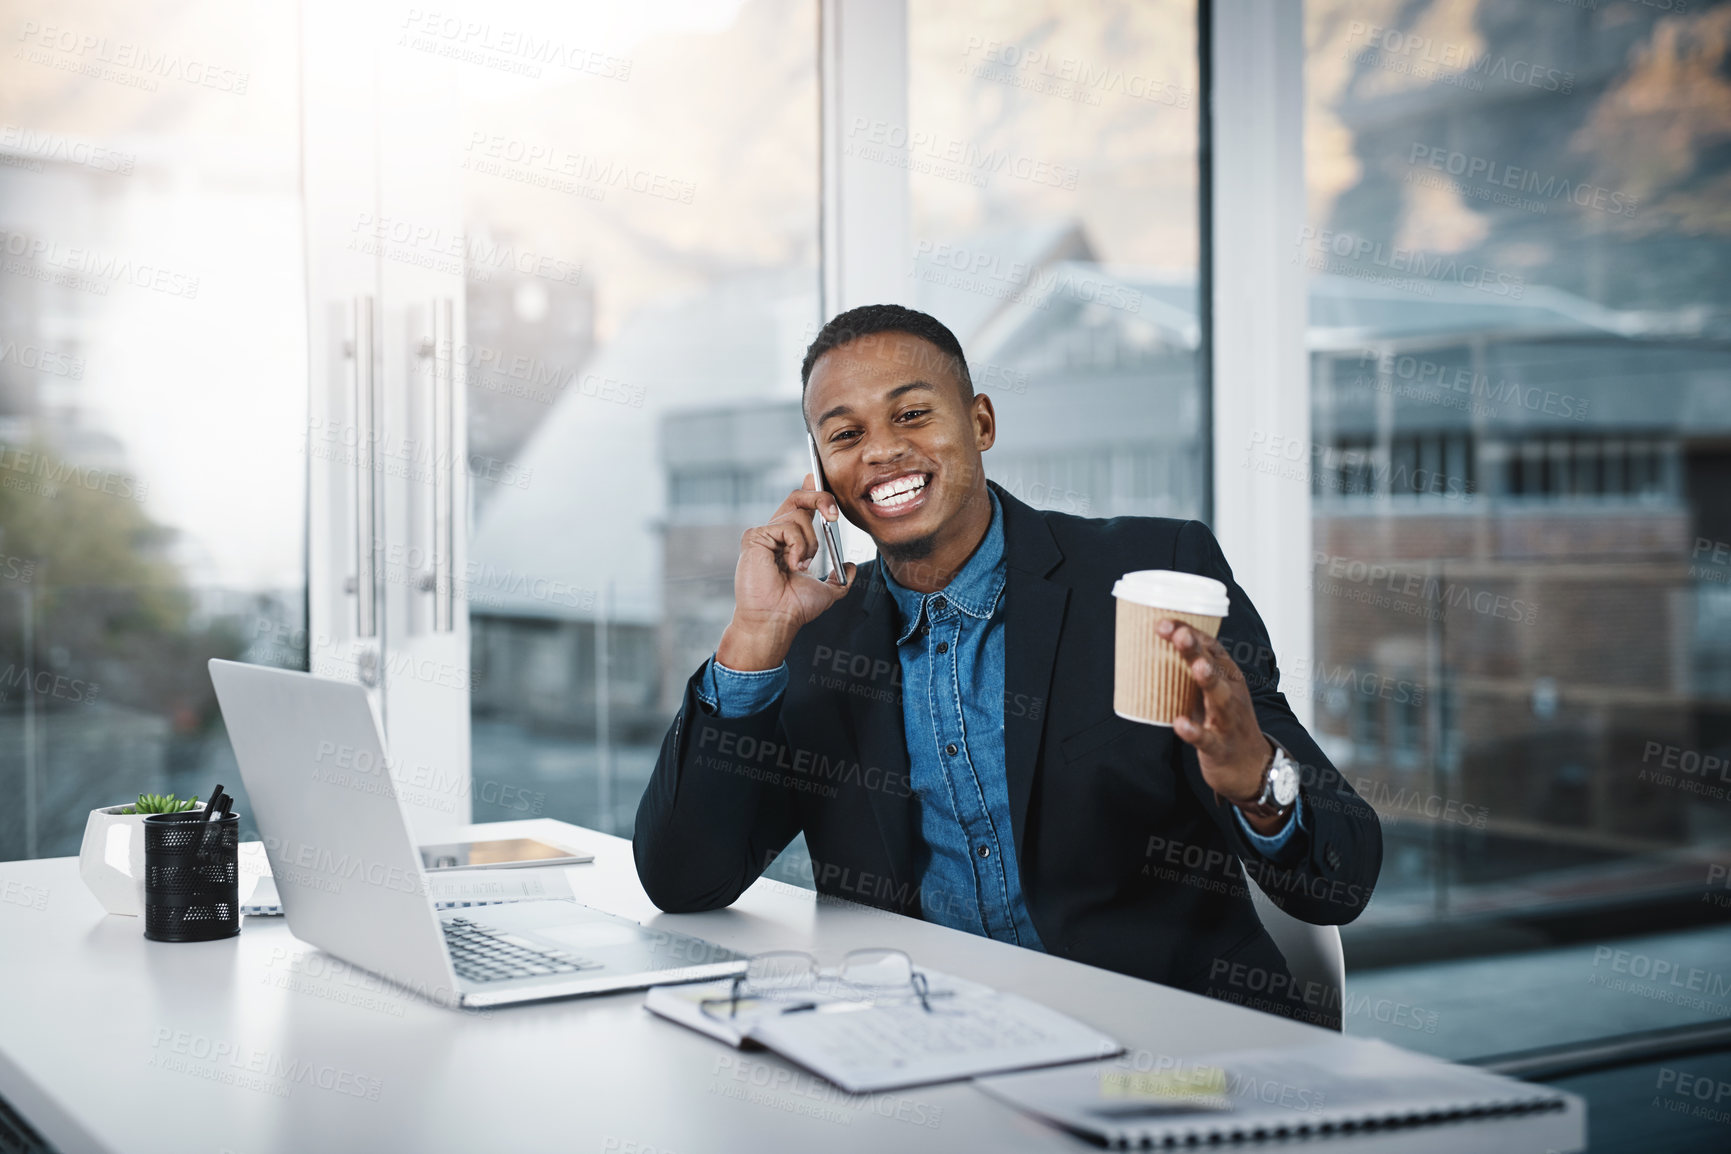 Buy stock photo Shot of a handsome young businessman talking on a cellphone while working in an office